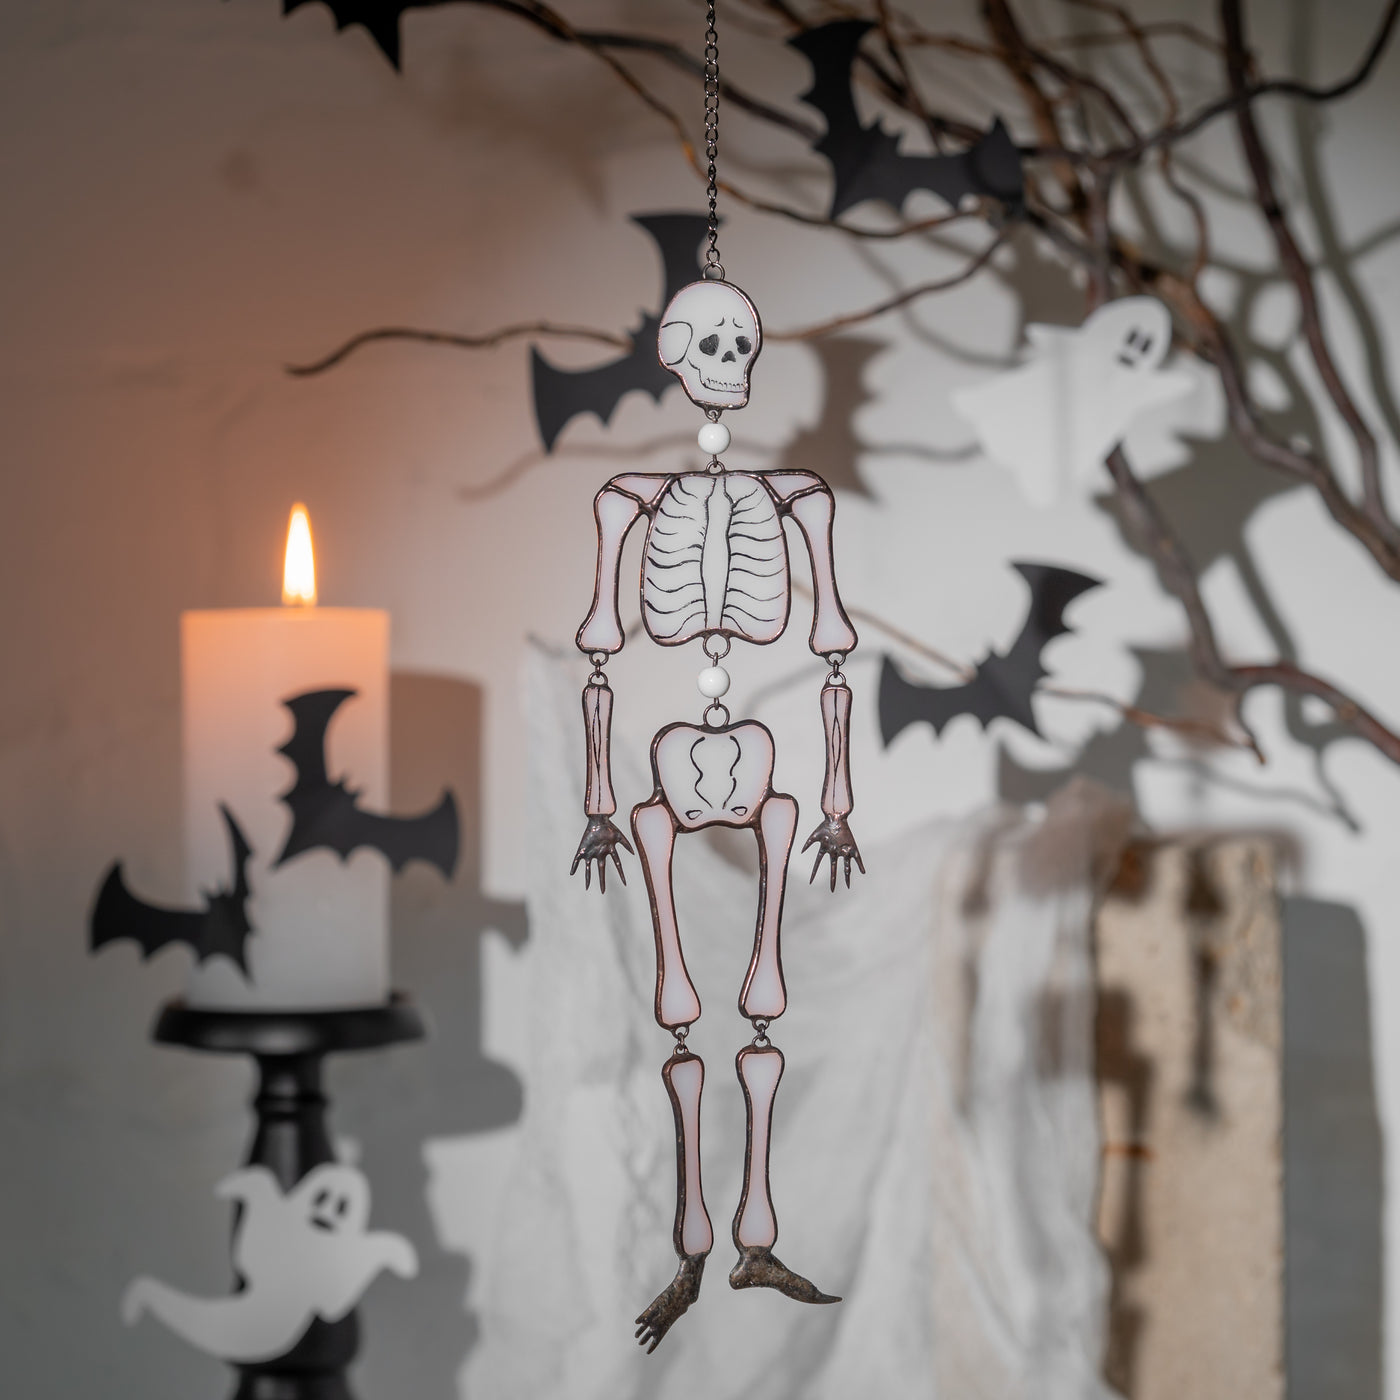 Skeleton miniature made of stained glass